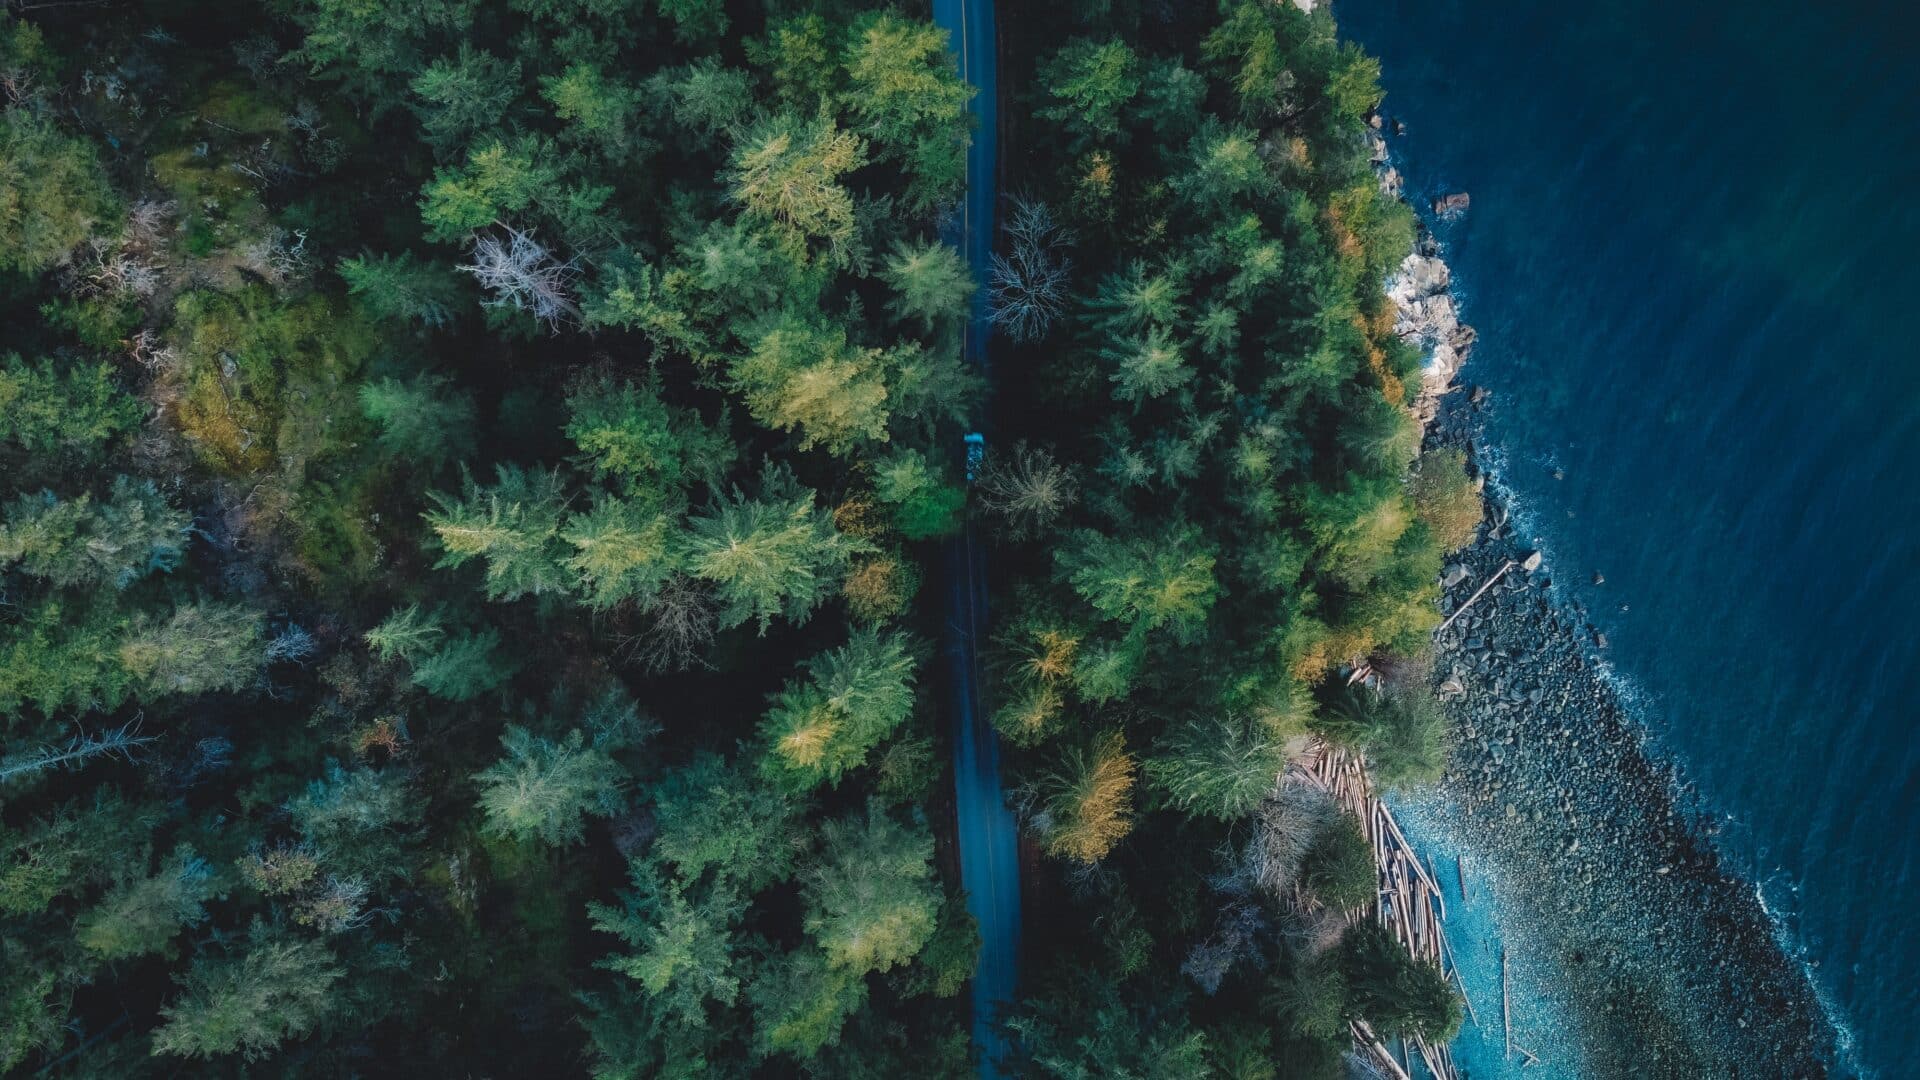 Ariel view of the Sunshine coast with the forests, road and beach.